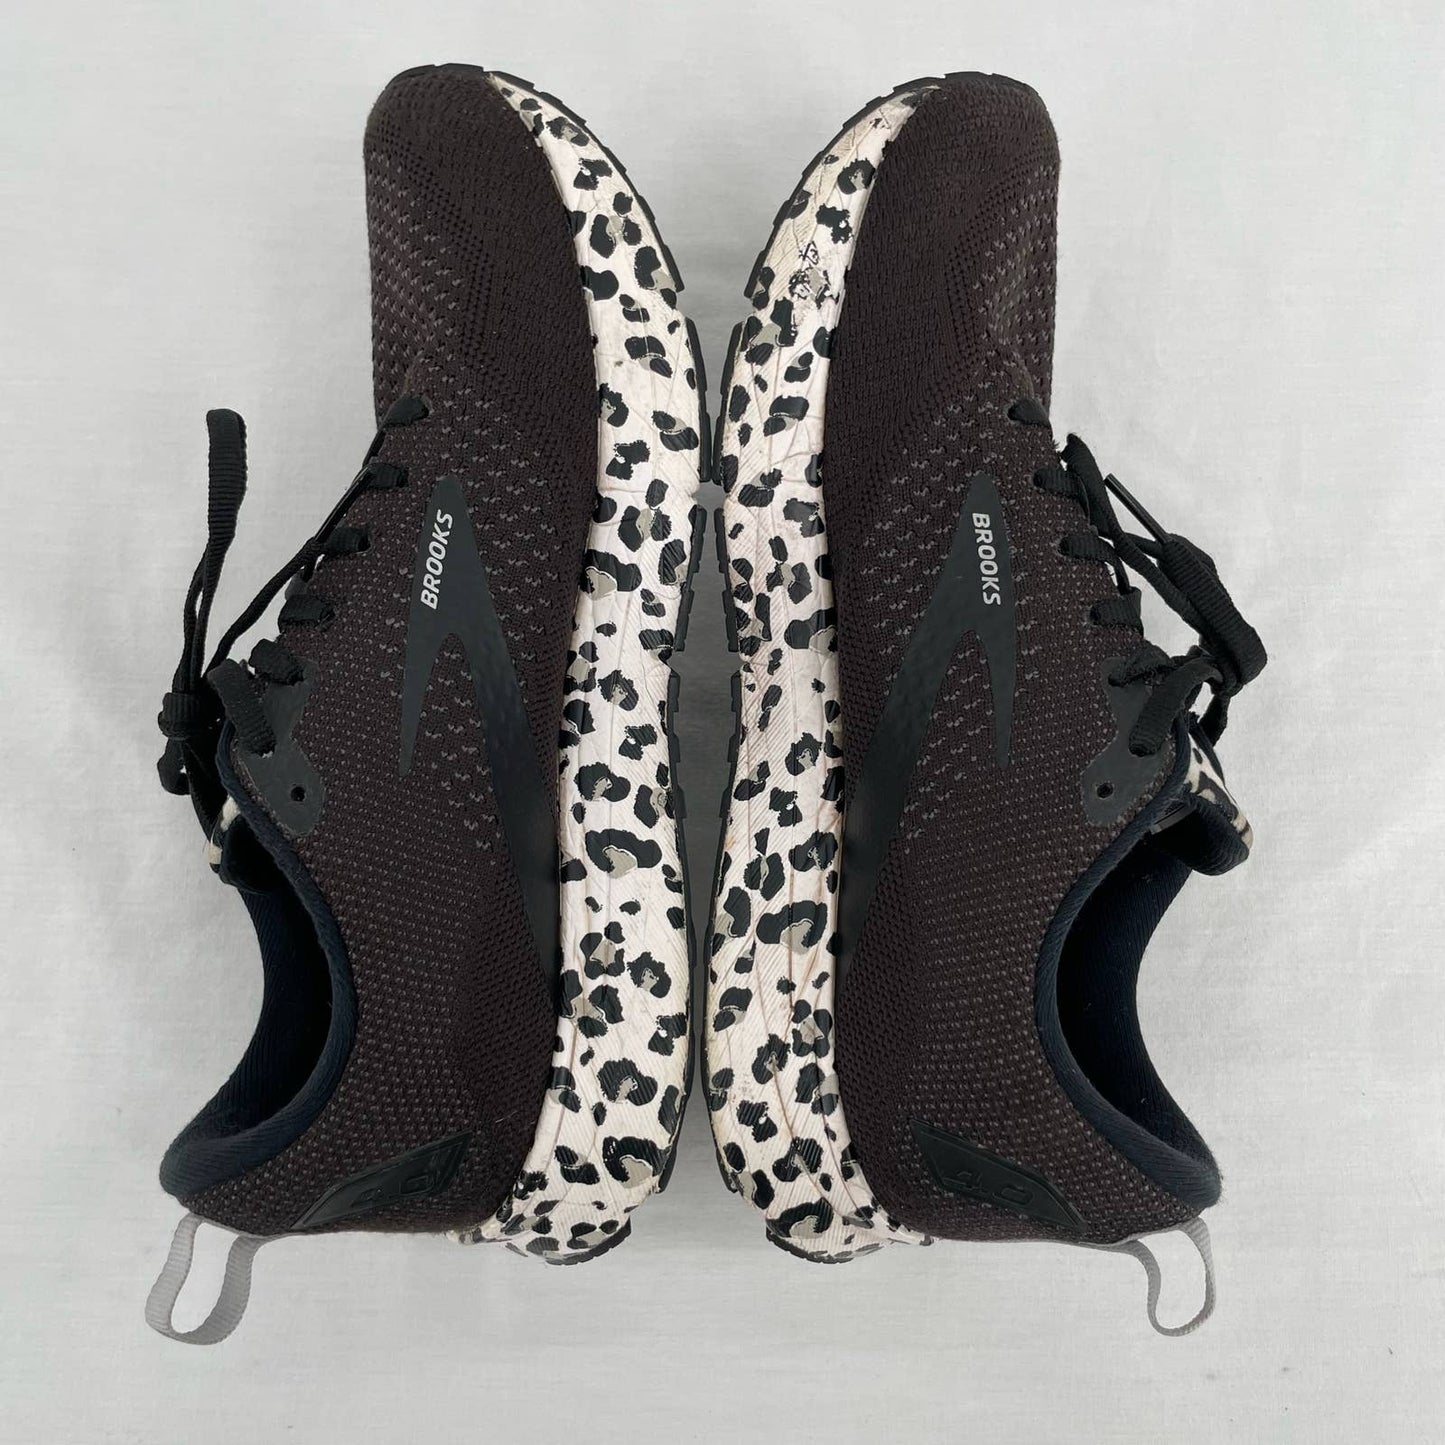 Brooks Revel 4 Running Shoes Wild Collection Snow Leopard Animal Print Black Size 10